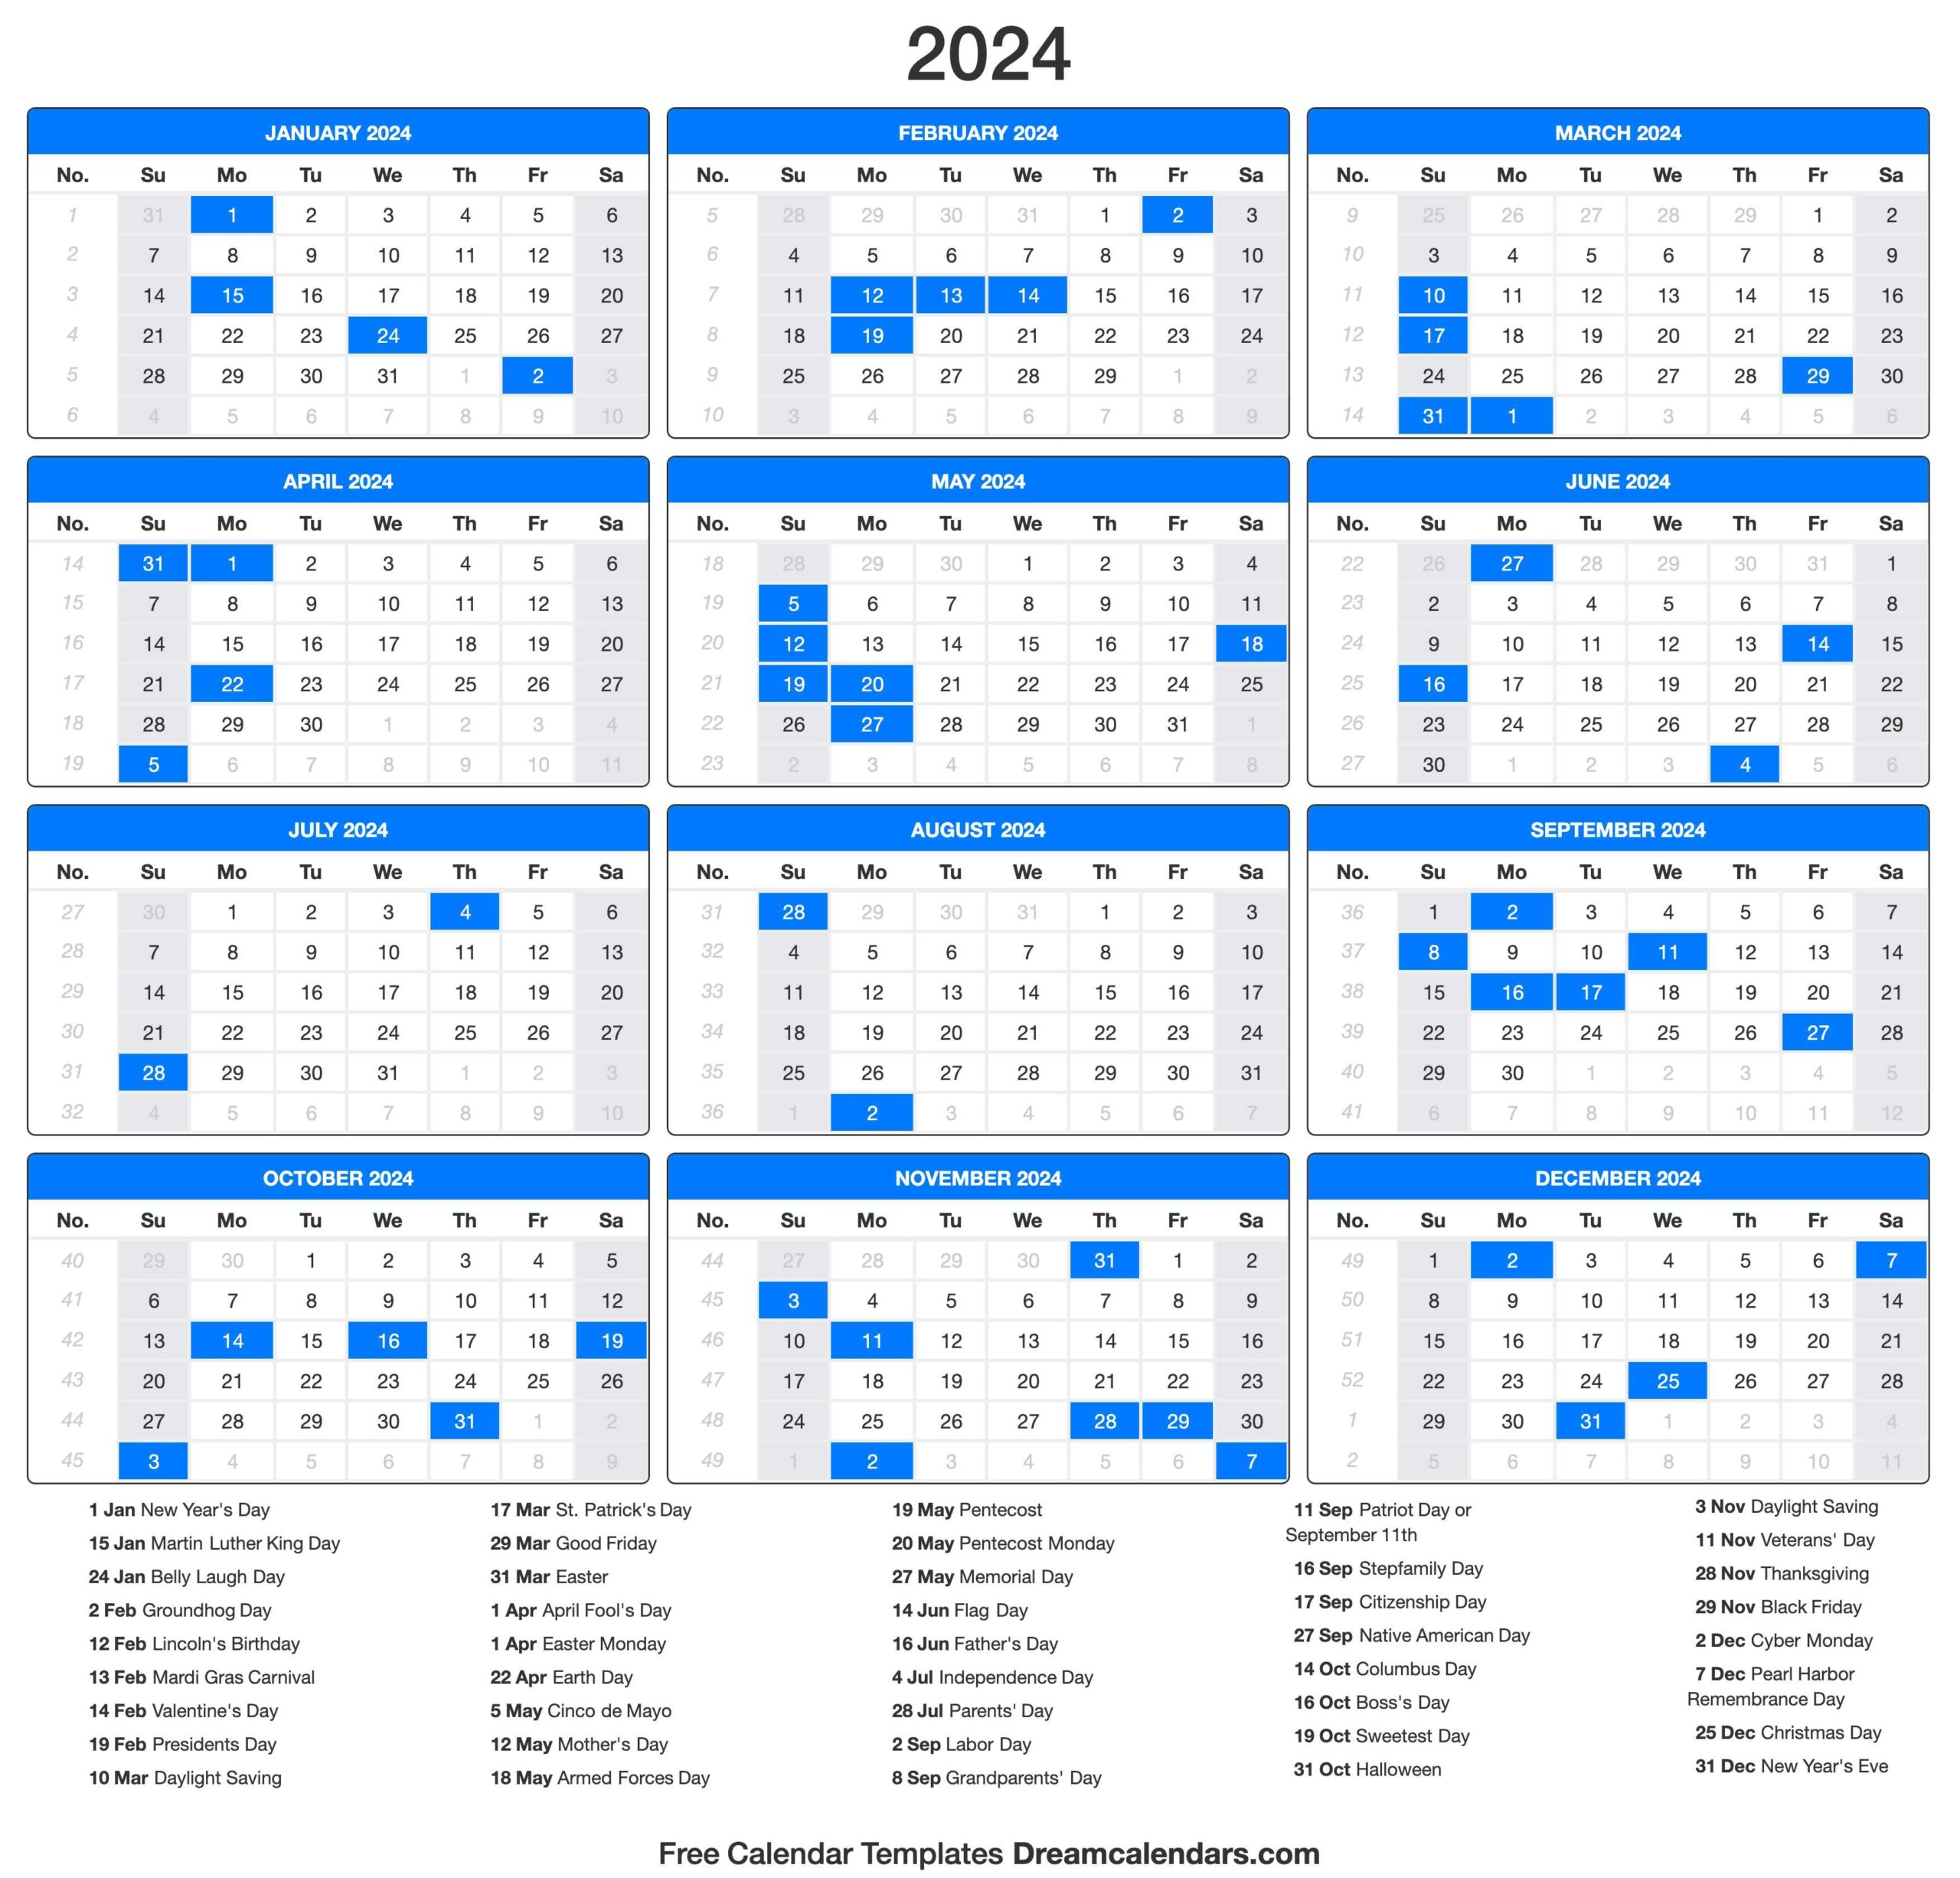 2024 Calendar - Free Printable 2024 Calendar With Holidays And Pictures